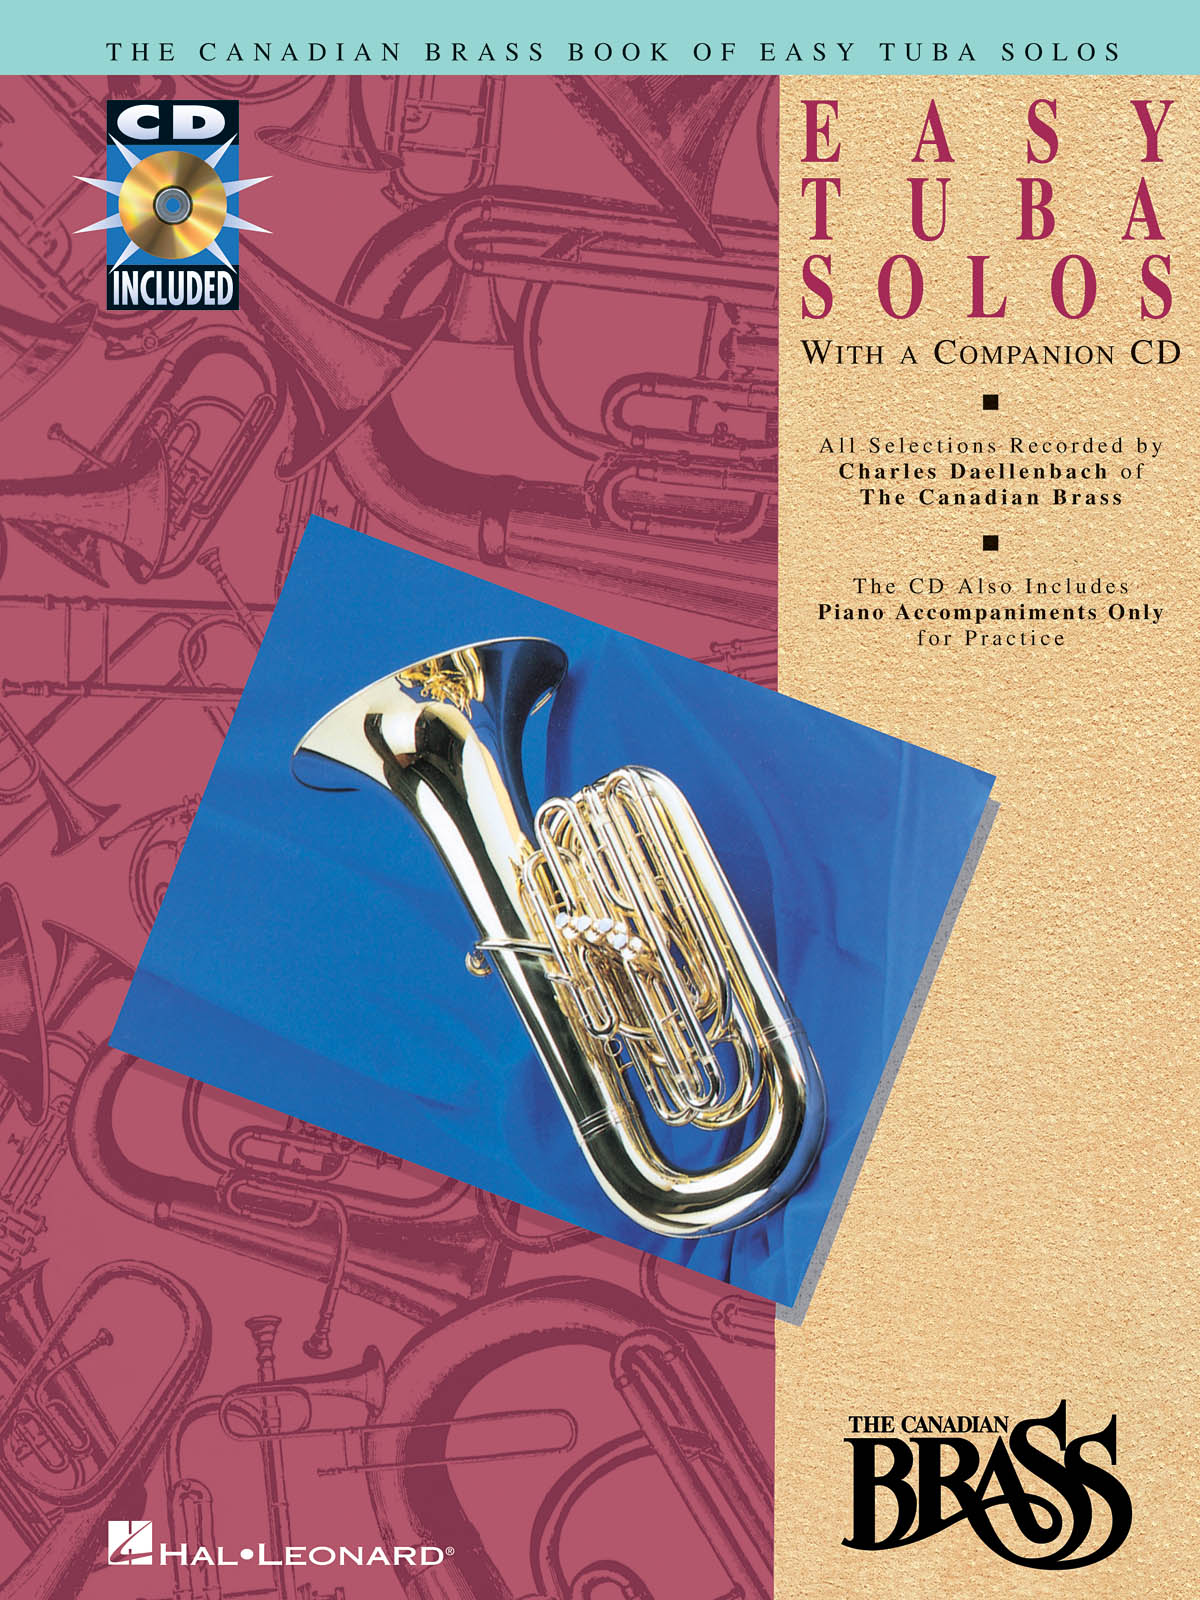 Canadian Brass Book Of Easy Tuba Solos - noty pro tubu